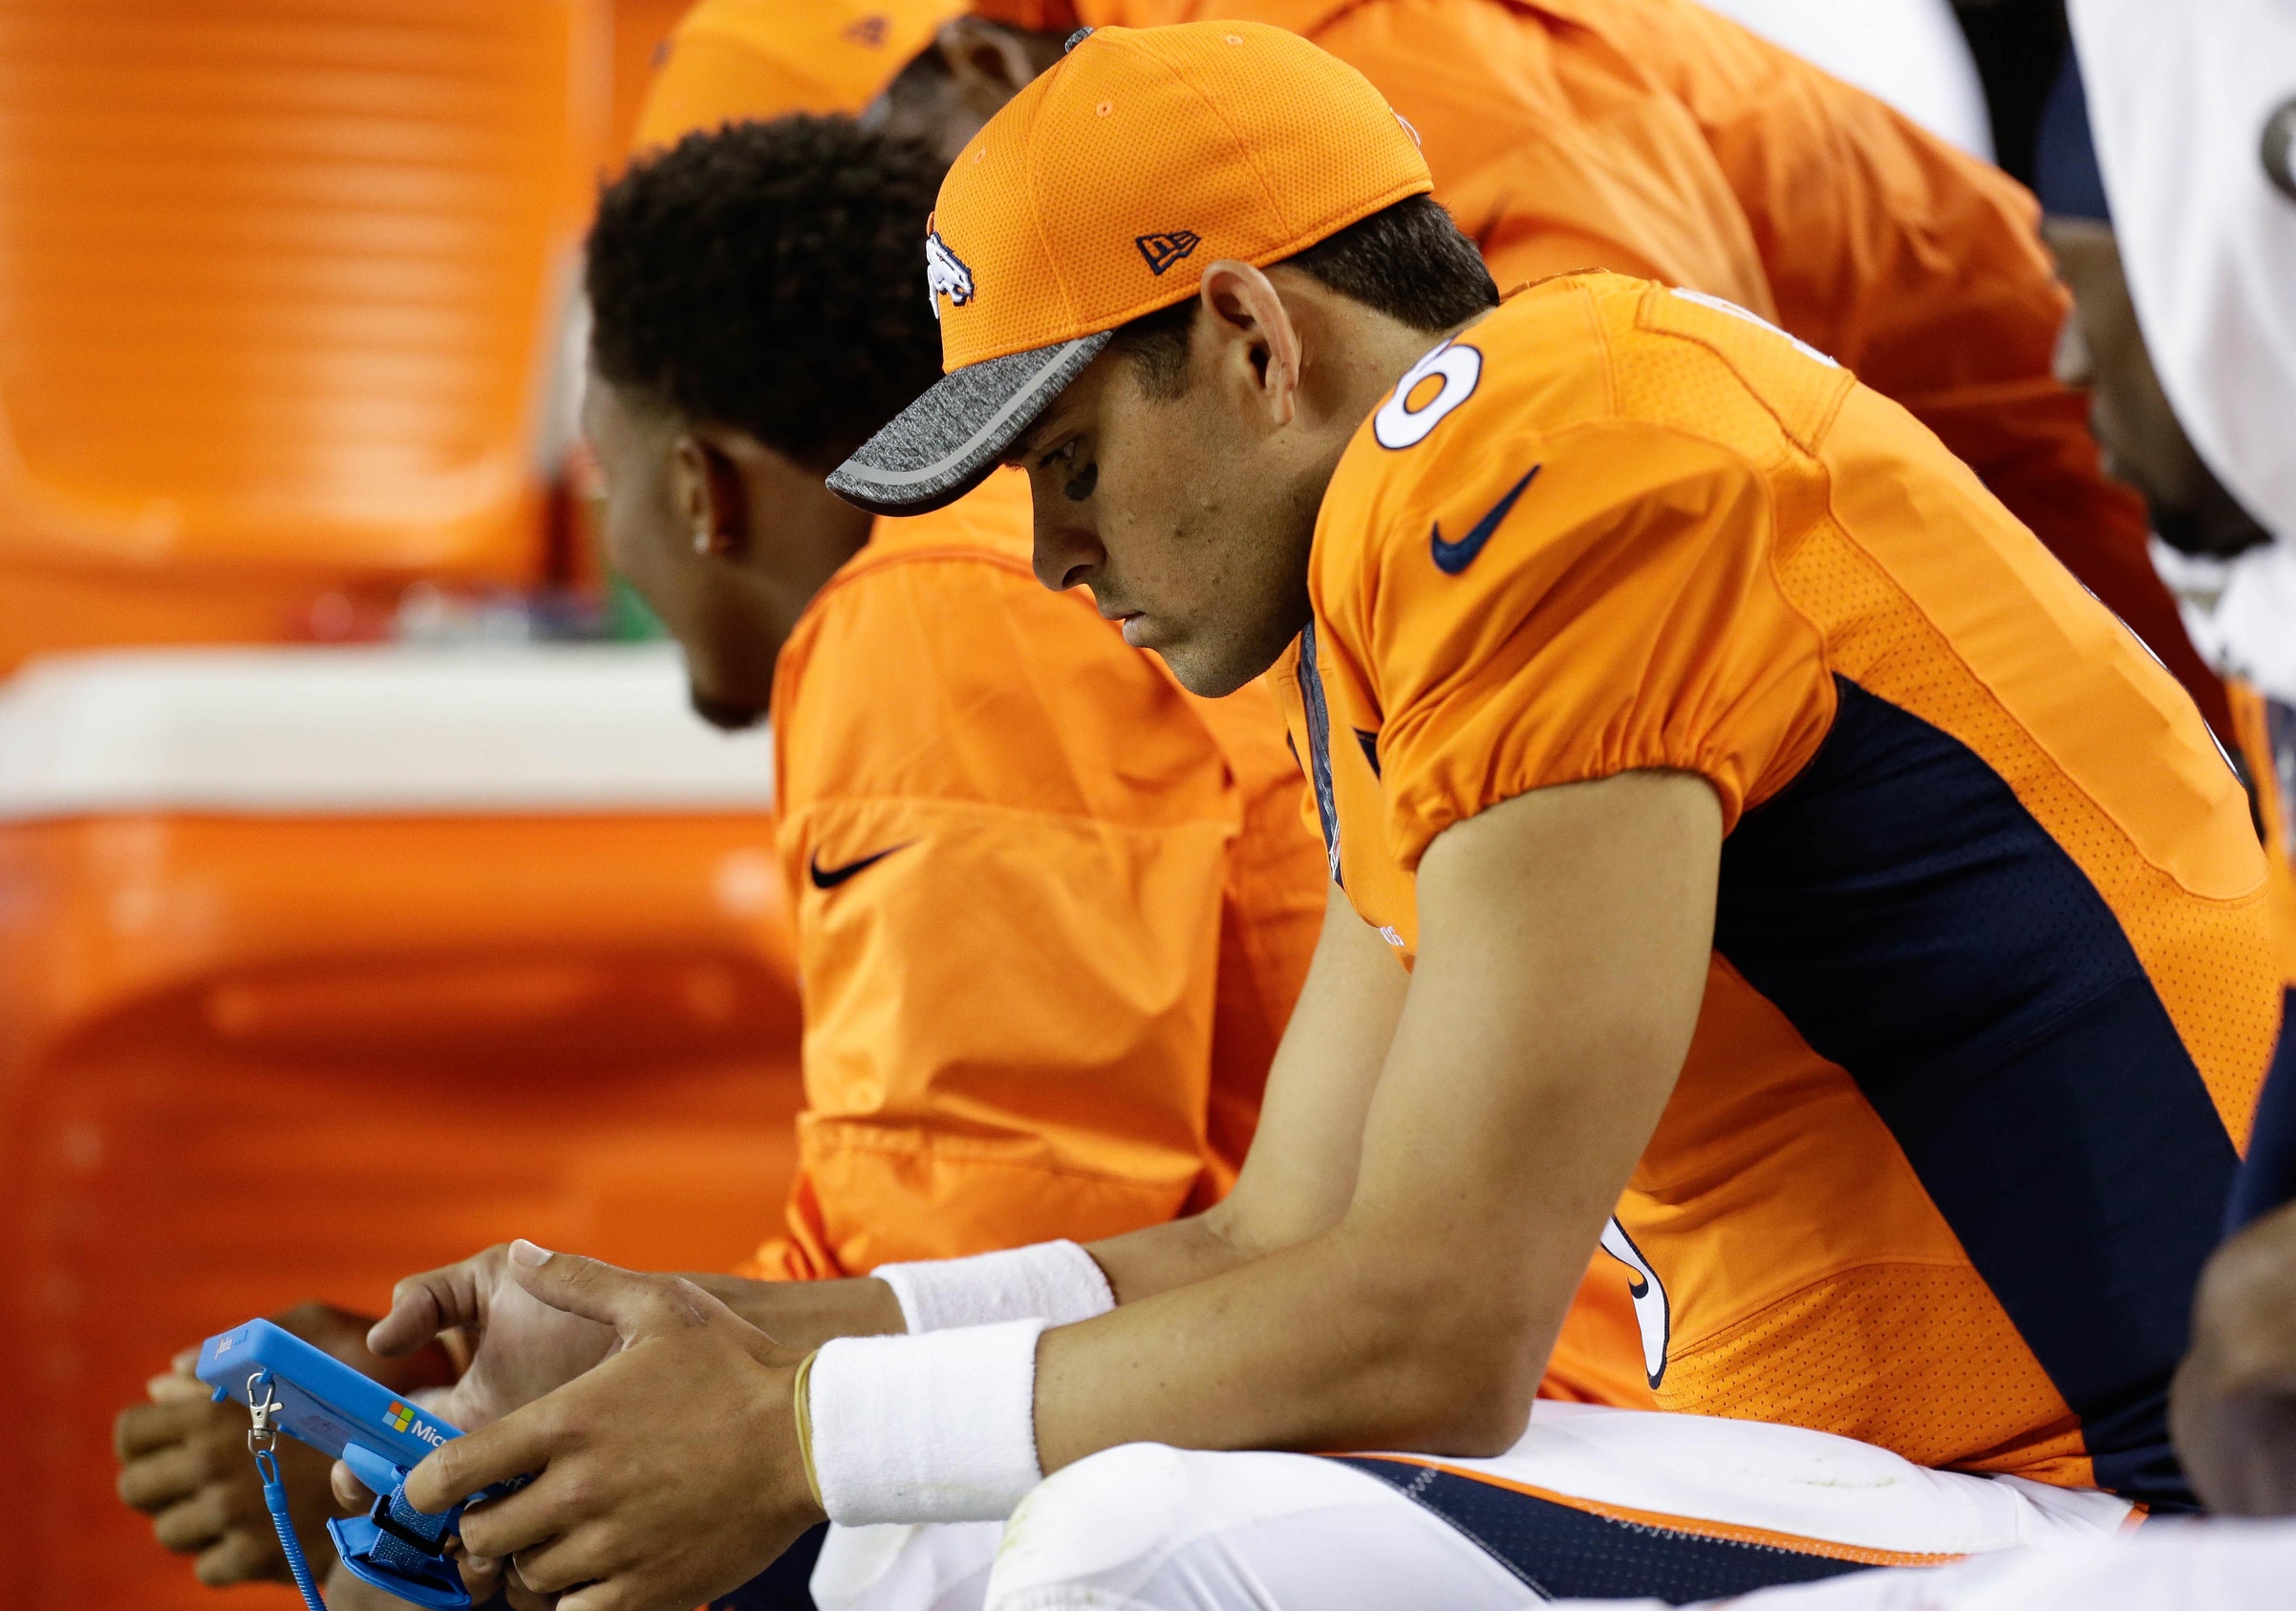 Aug 20, 2016; Denver, CO, USA; Denver Broncos quarterback Mark Sanchez (6) on the bench in the fourth quarter against the San Francisco 49ers at Sports Authority Field at Mile High. The 49ers defeated the Broncos 31-24. Mandatory Credit: Isaiah J. Downing-USA TODAY Sports 